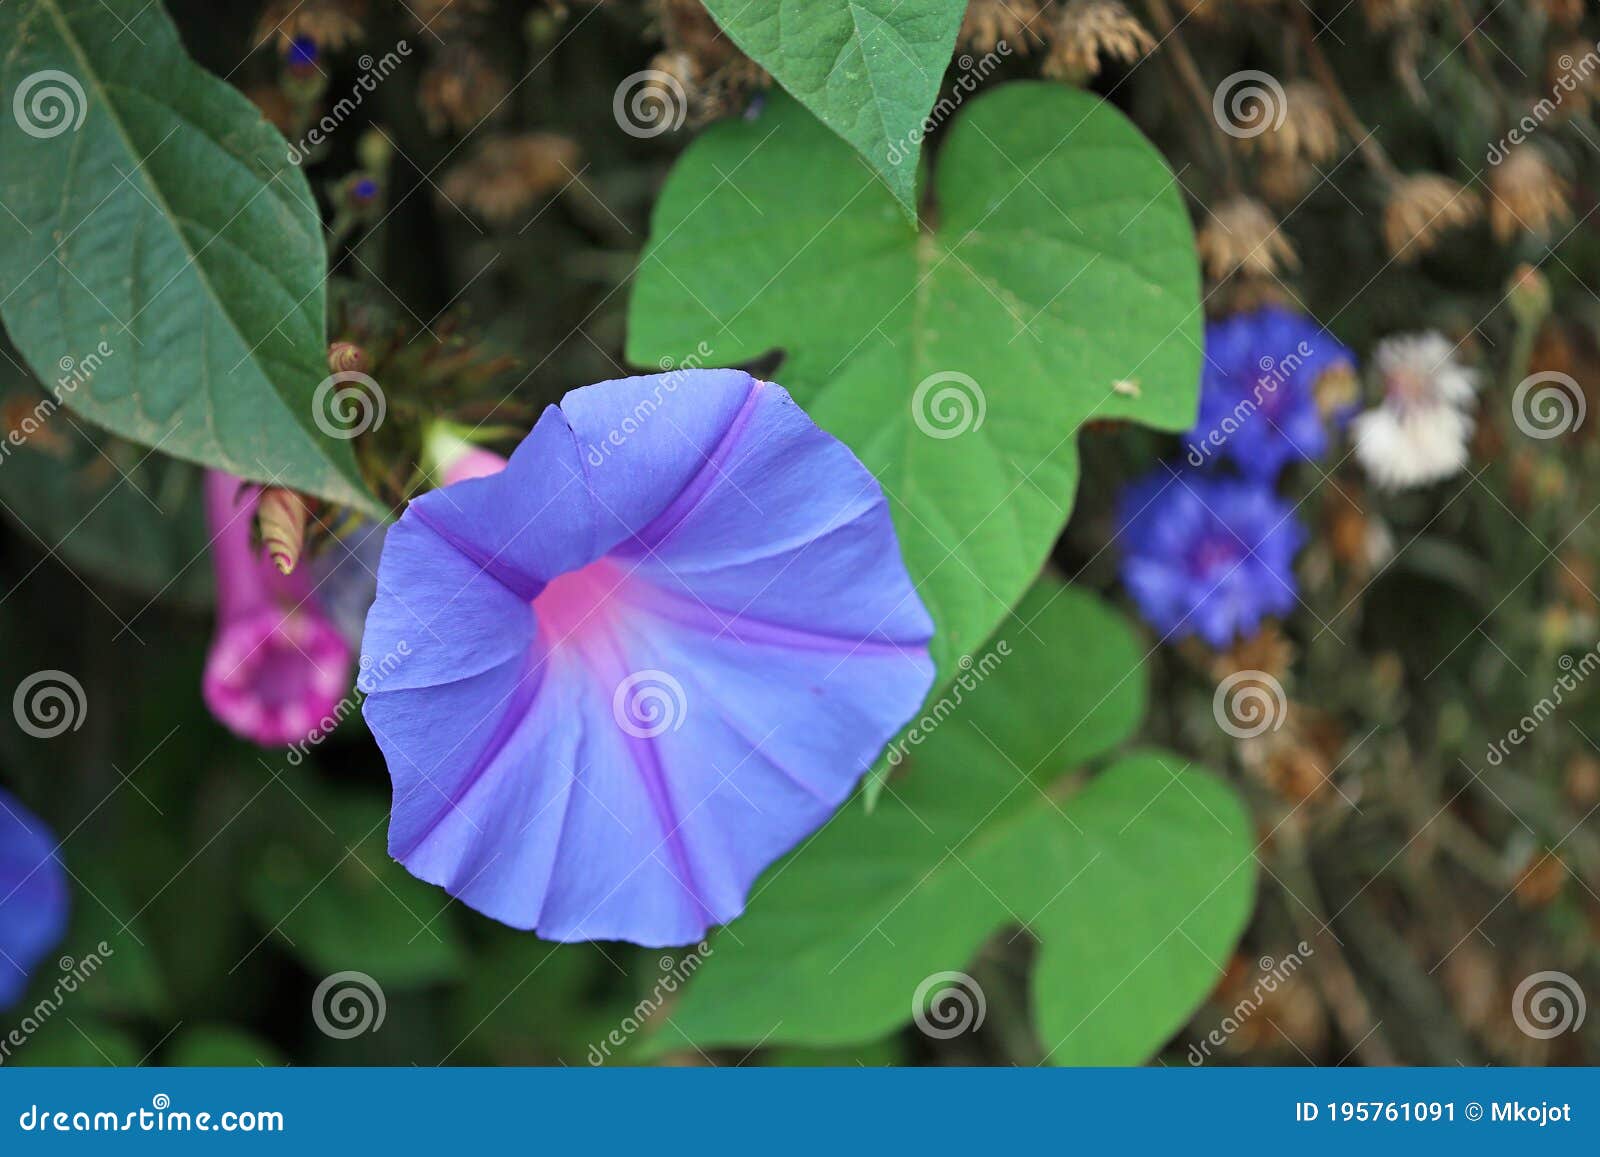 Blue Morning Glory Flower Stock Image Image Of Natural 195761091